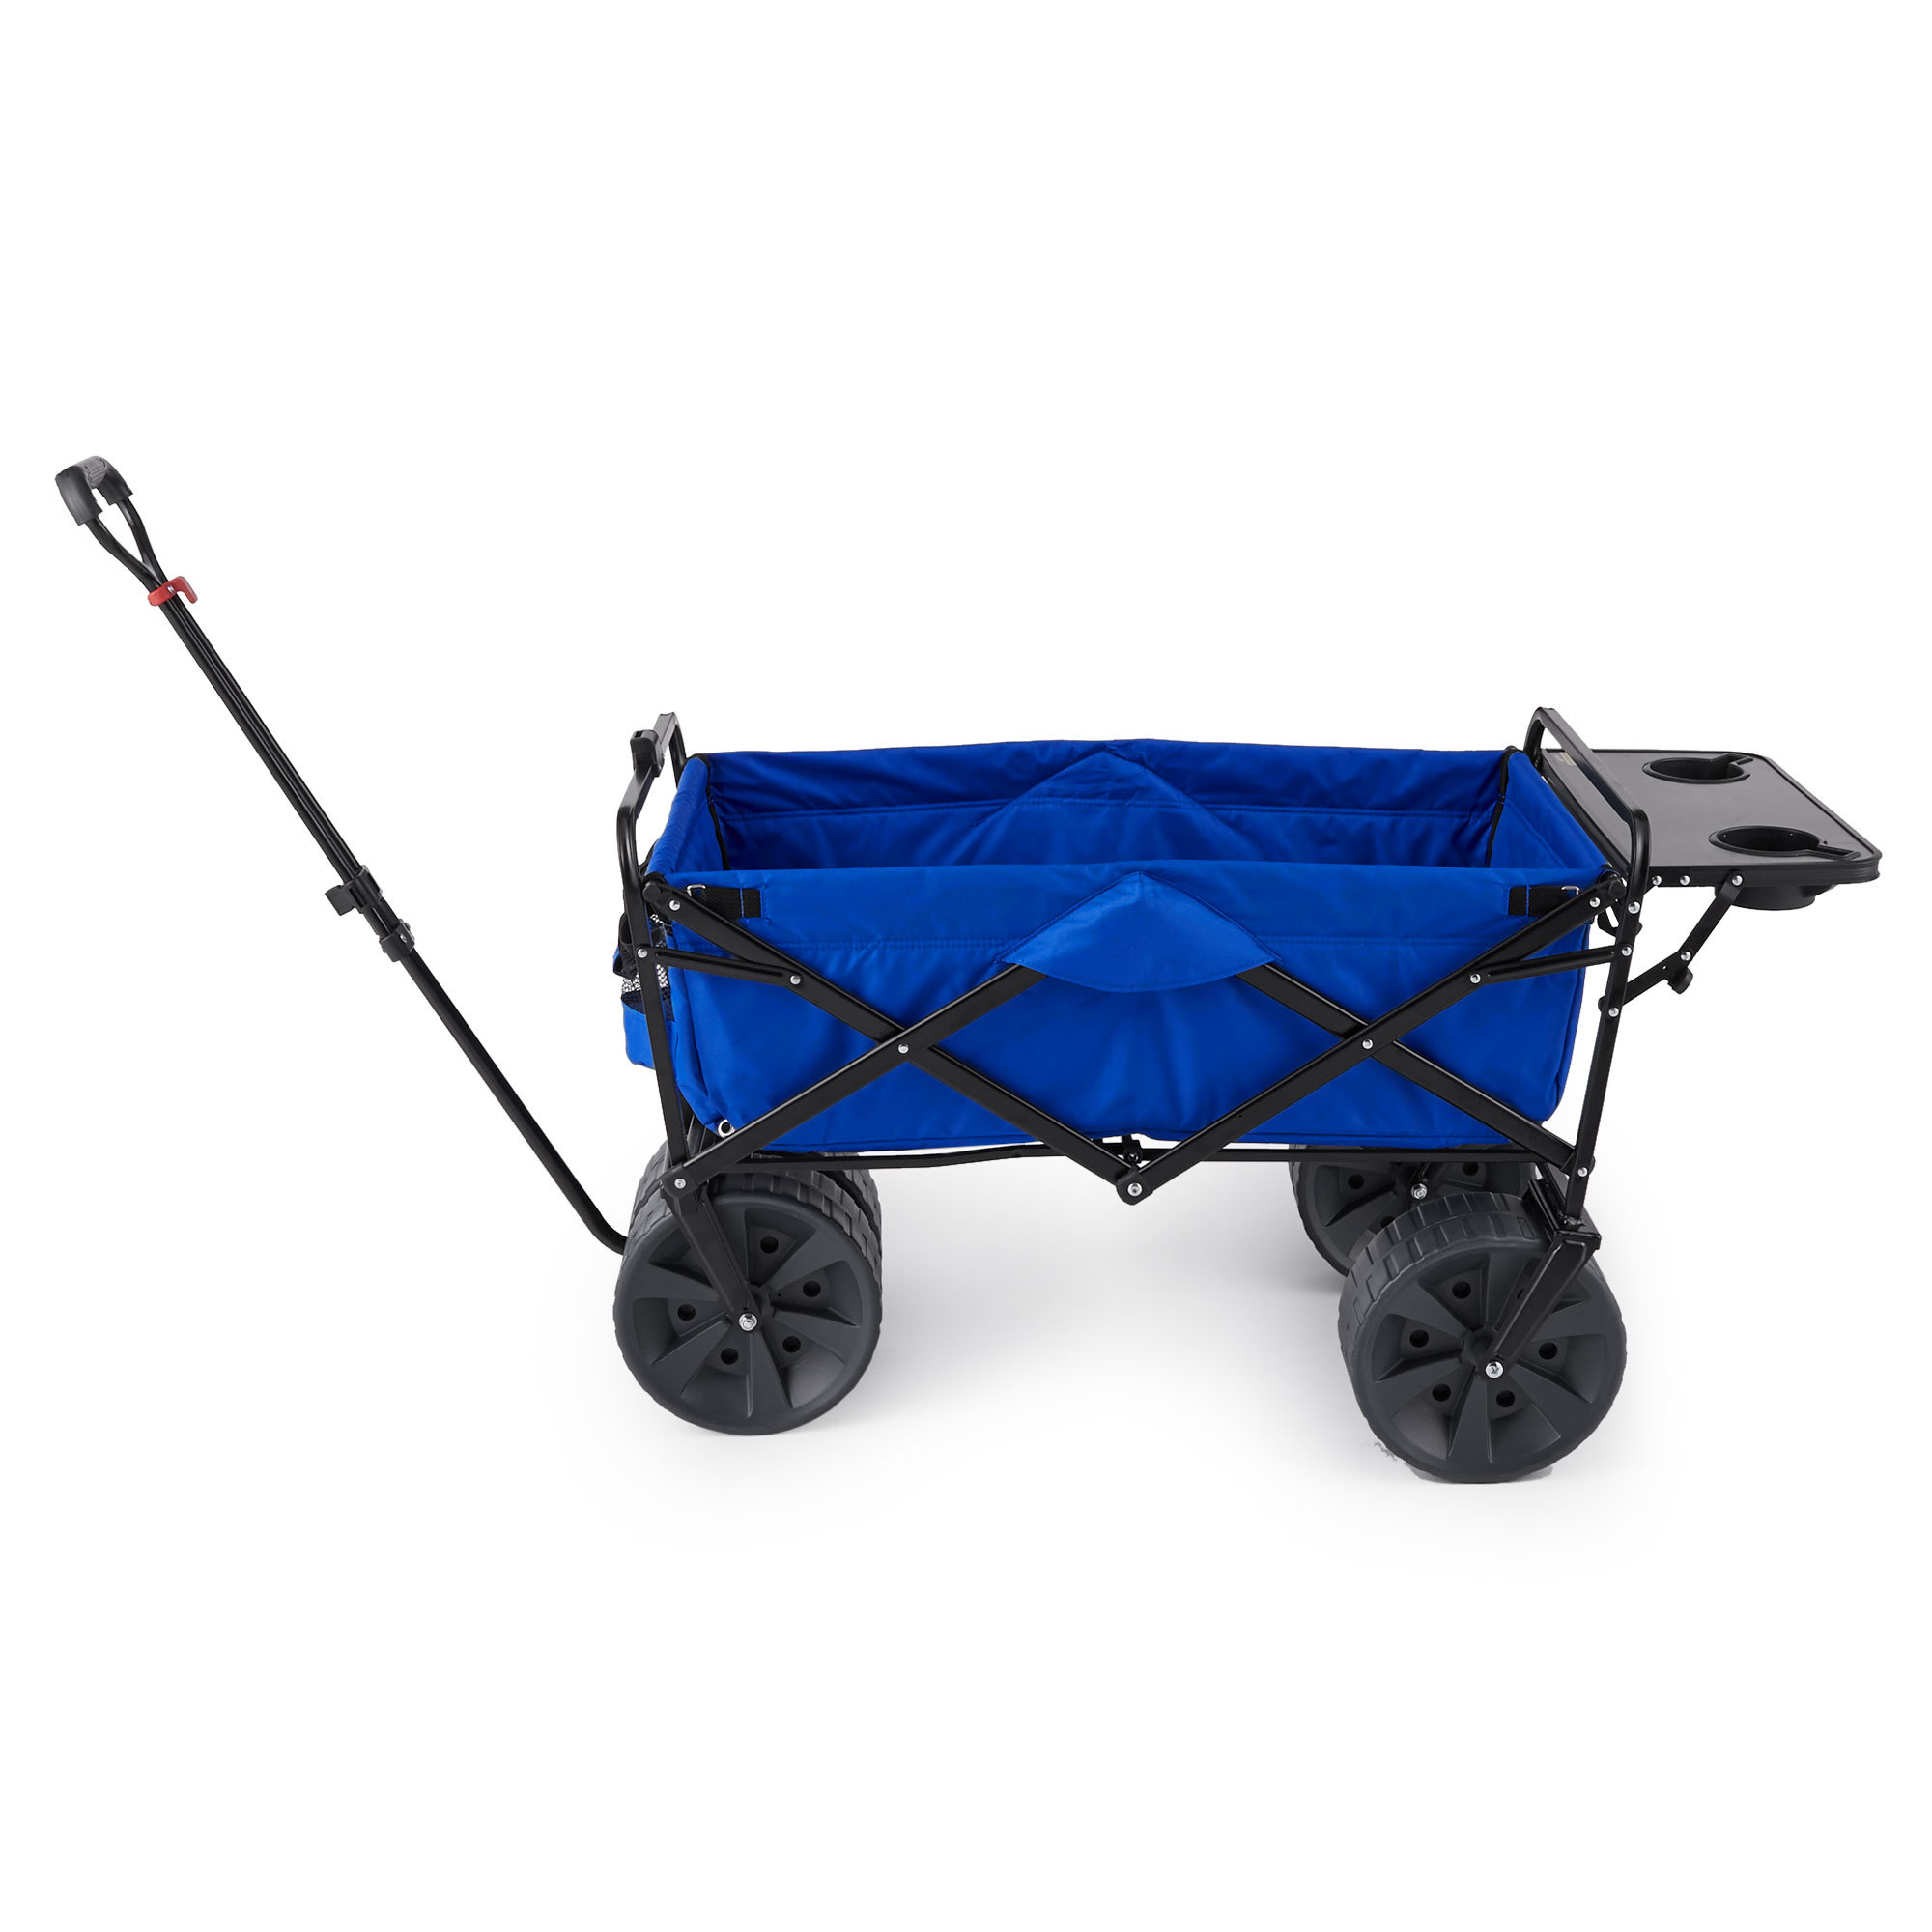 Timber Ridge Outdoor Collapsible Wagon Utility Folding Cart Heavy Duty All Terrain Wheels for Shopping Camping Garden Beach with Side Bag and Cup Holders 